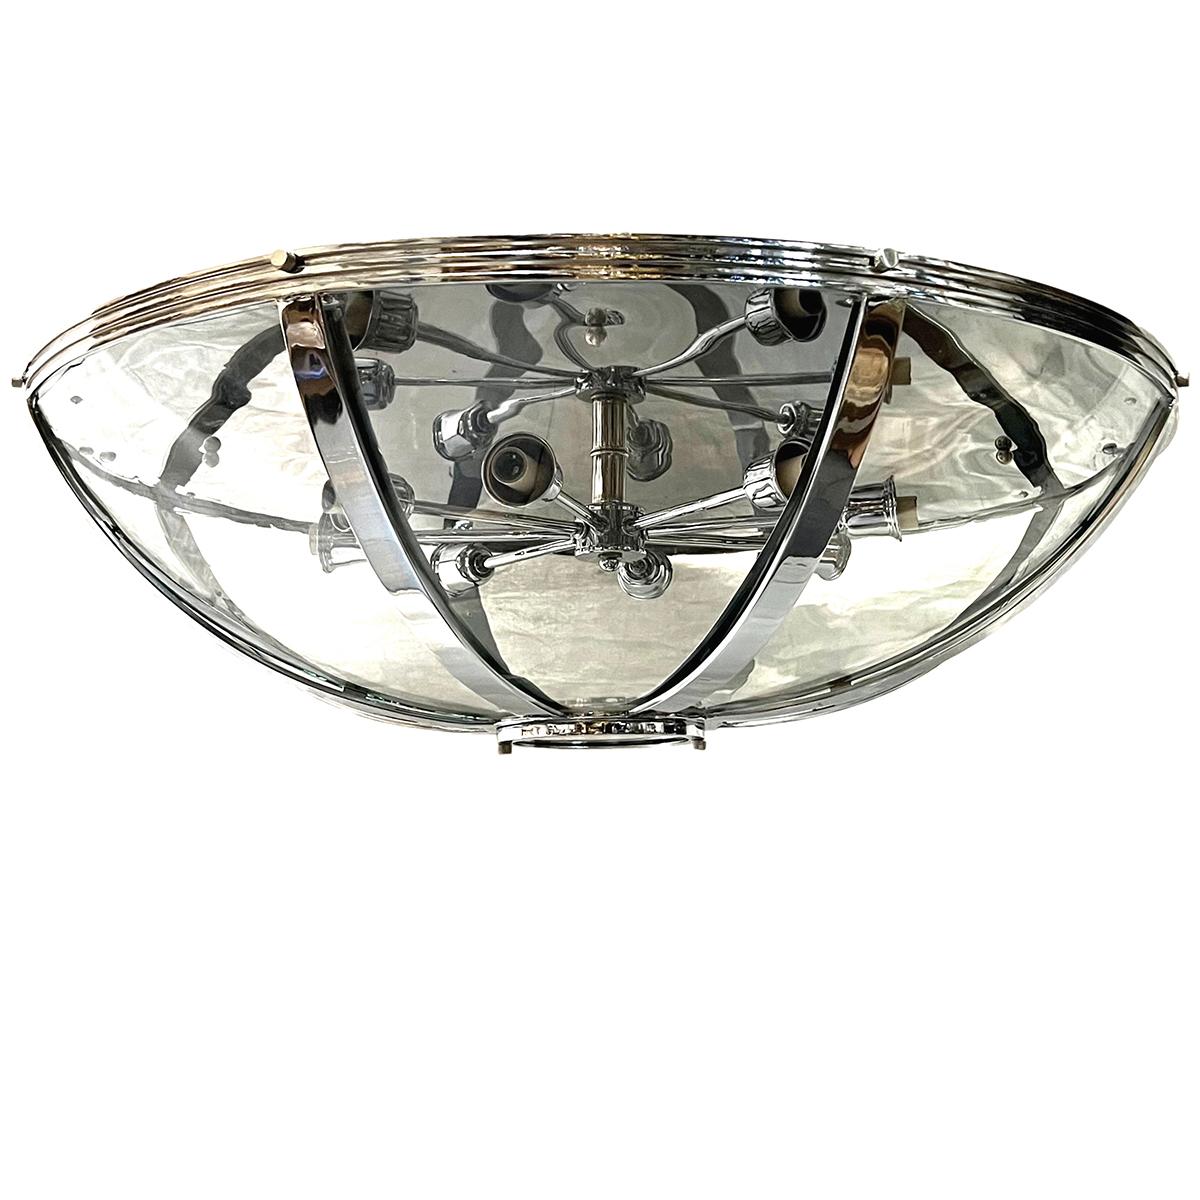 A circa 1960's French nickel plated light fixture with eight interior candelabra lights.

Measurements:
Diameter: 30